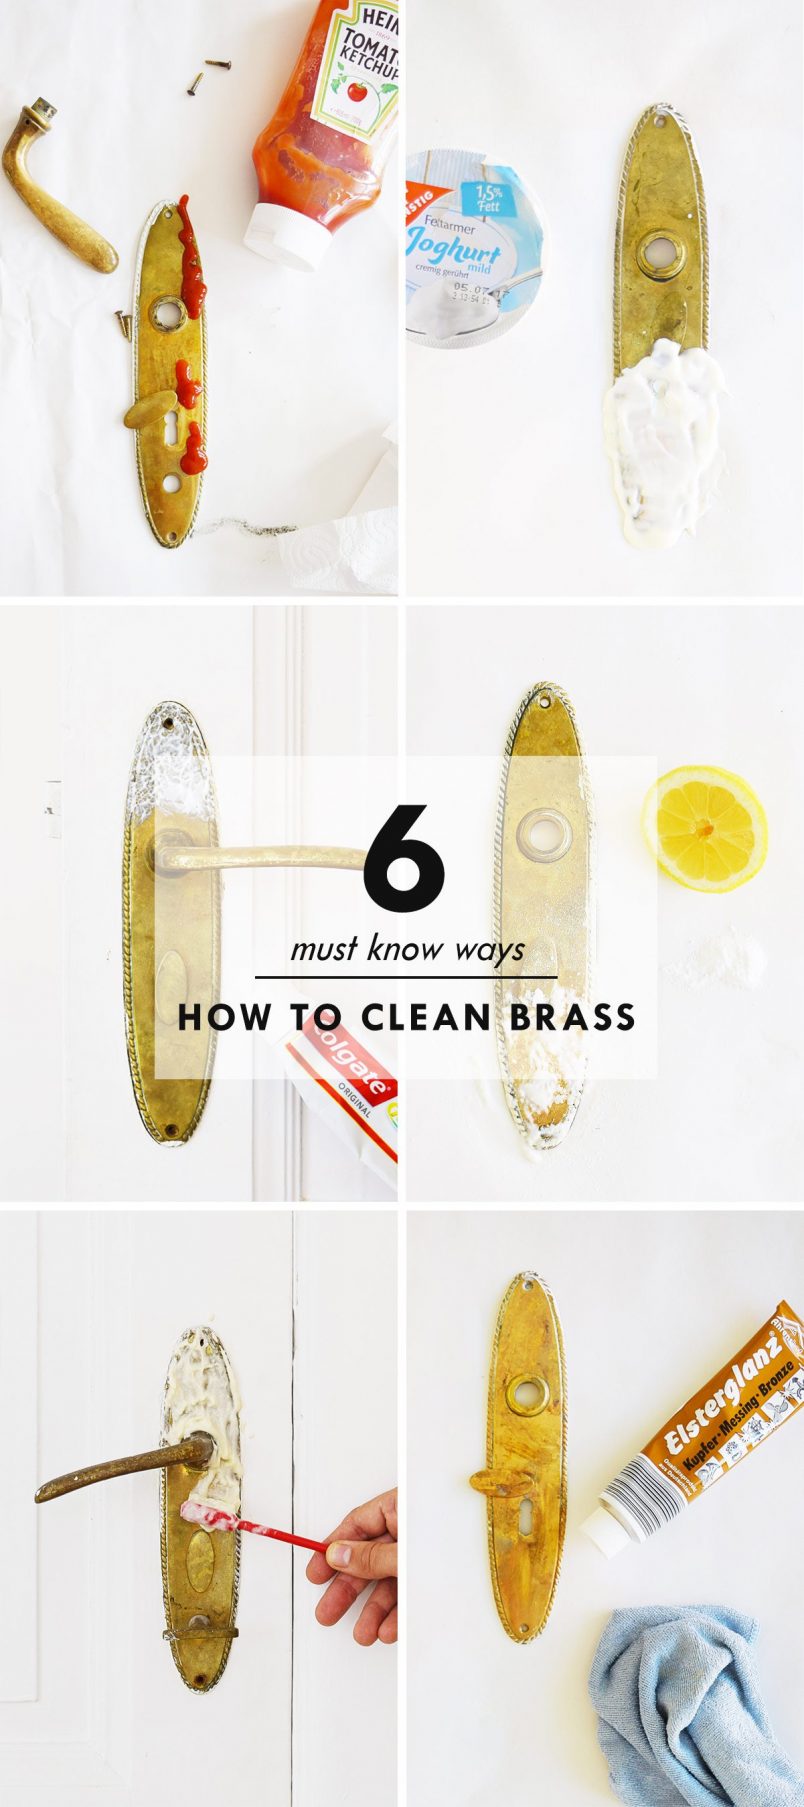 Cleaning Brass Sheet Metal: How to Keep Your Projects Looking Great